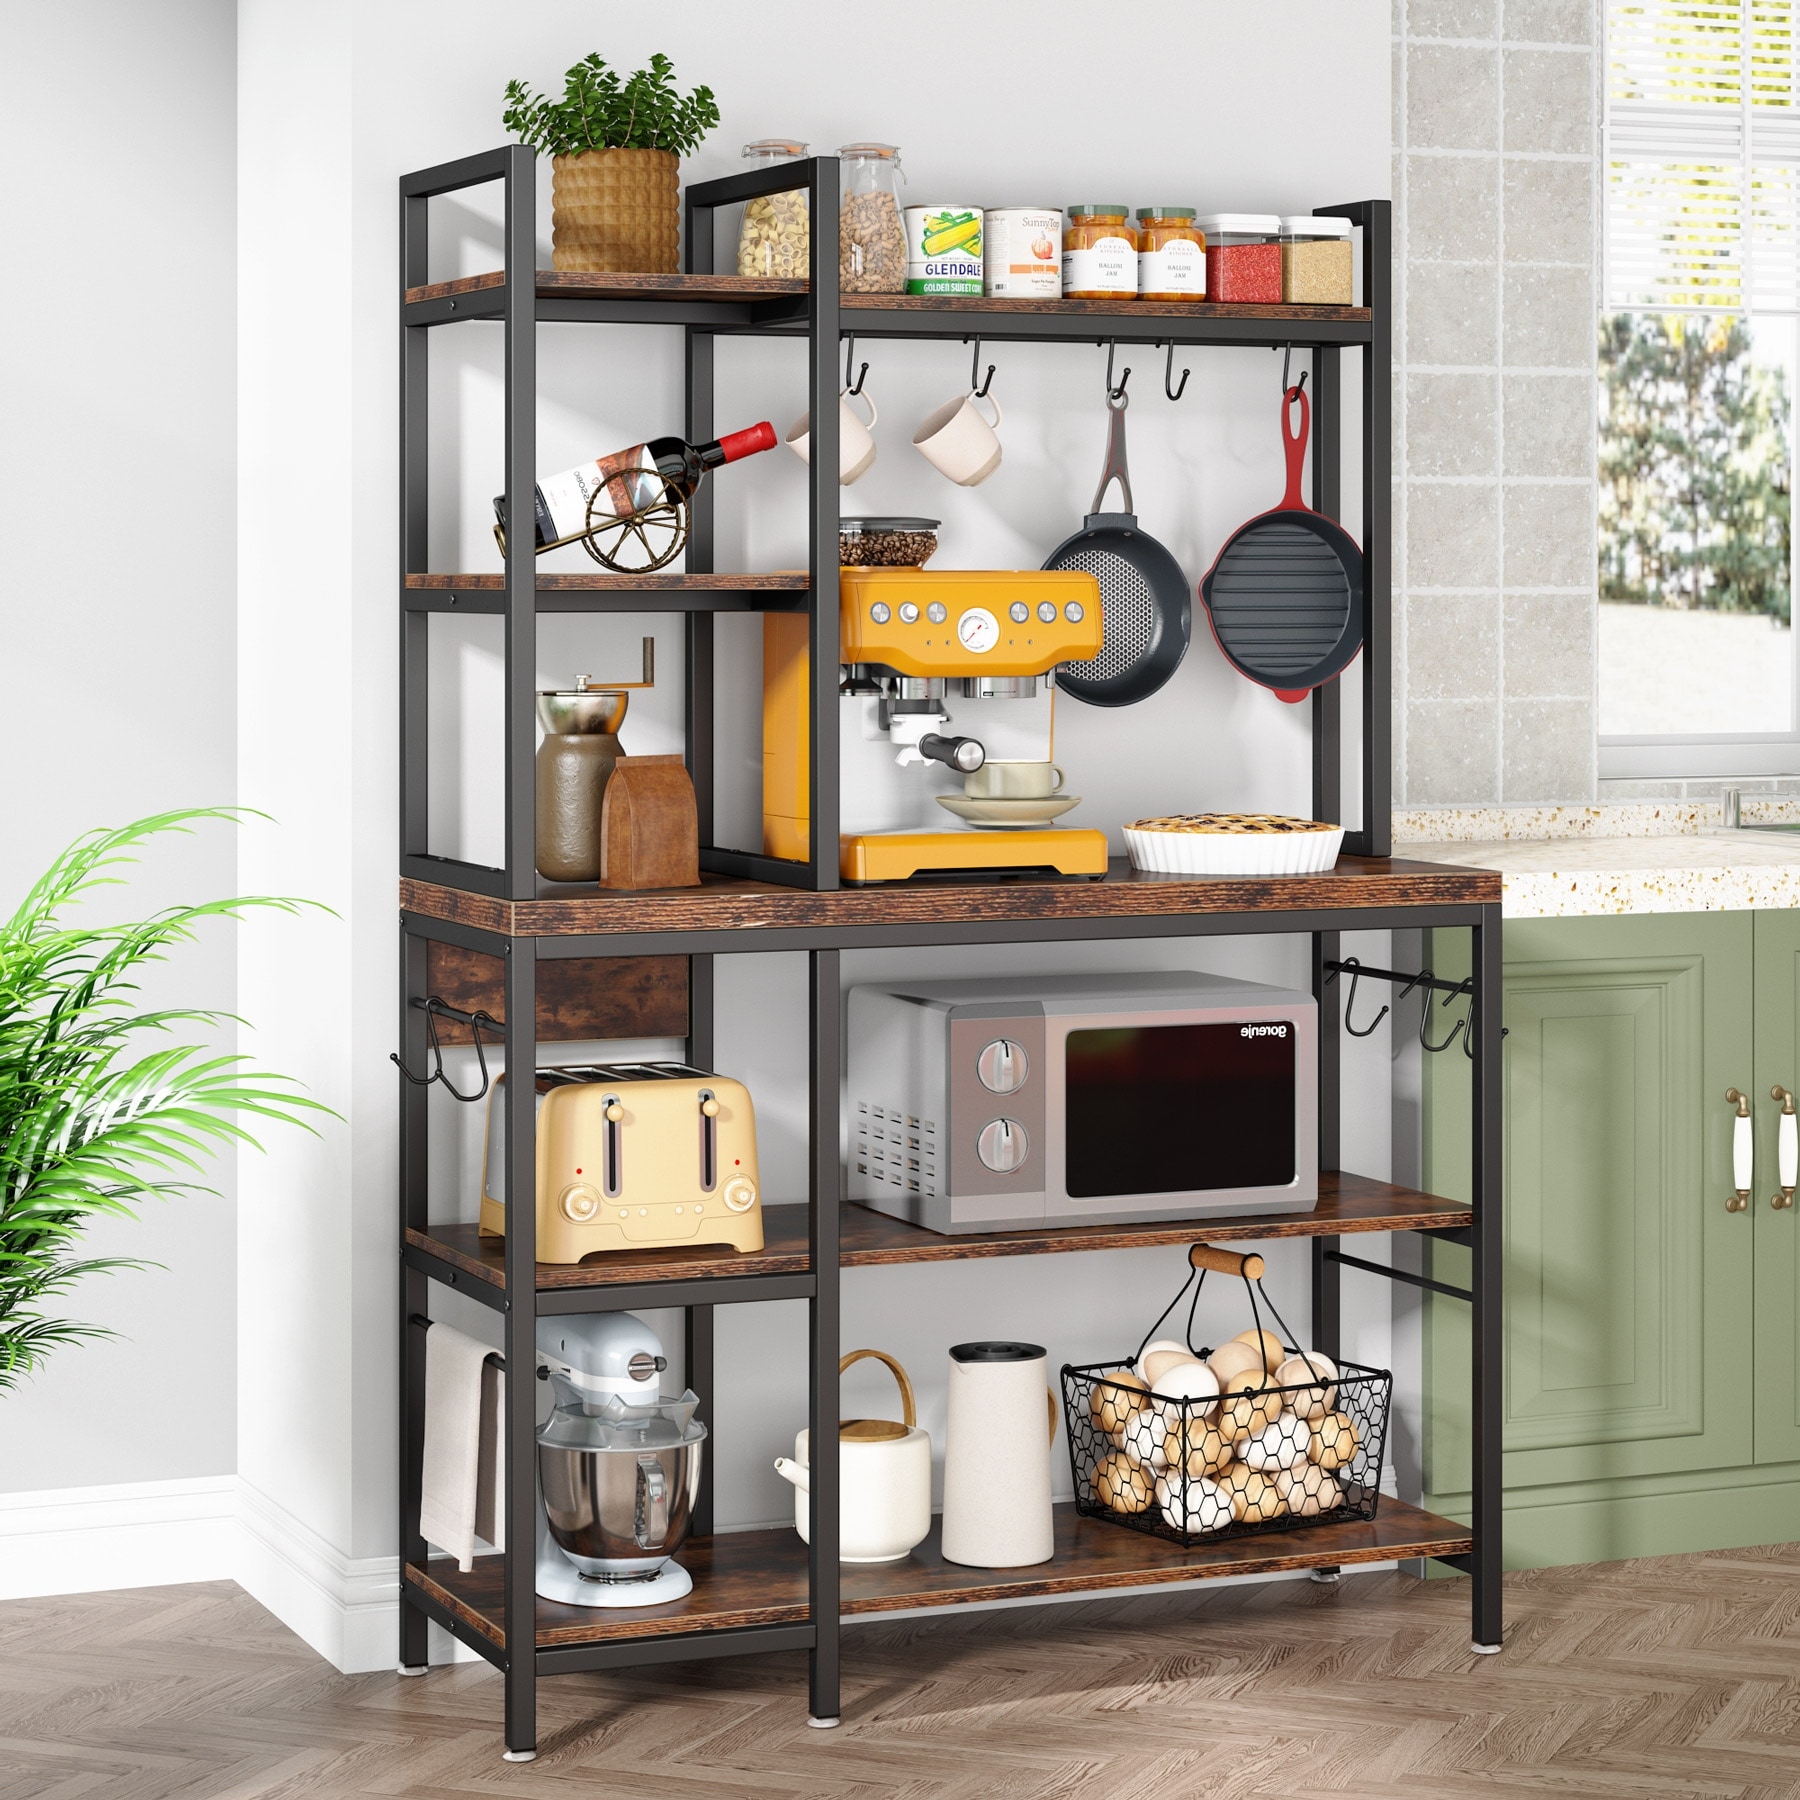 https://ak1.ostkcdn.com/images/products/is/images/direct/109e79d4ba6a573f1592ef5f05240e7c3c8bb514/Kitchen-Bakers-Rack-with-Storage%2C-43-inch-Microwave-Stand-5-Tier-Kitchen-Utility-Storage-Shelf.jpg